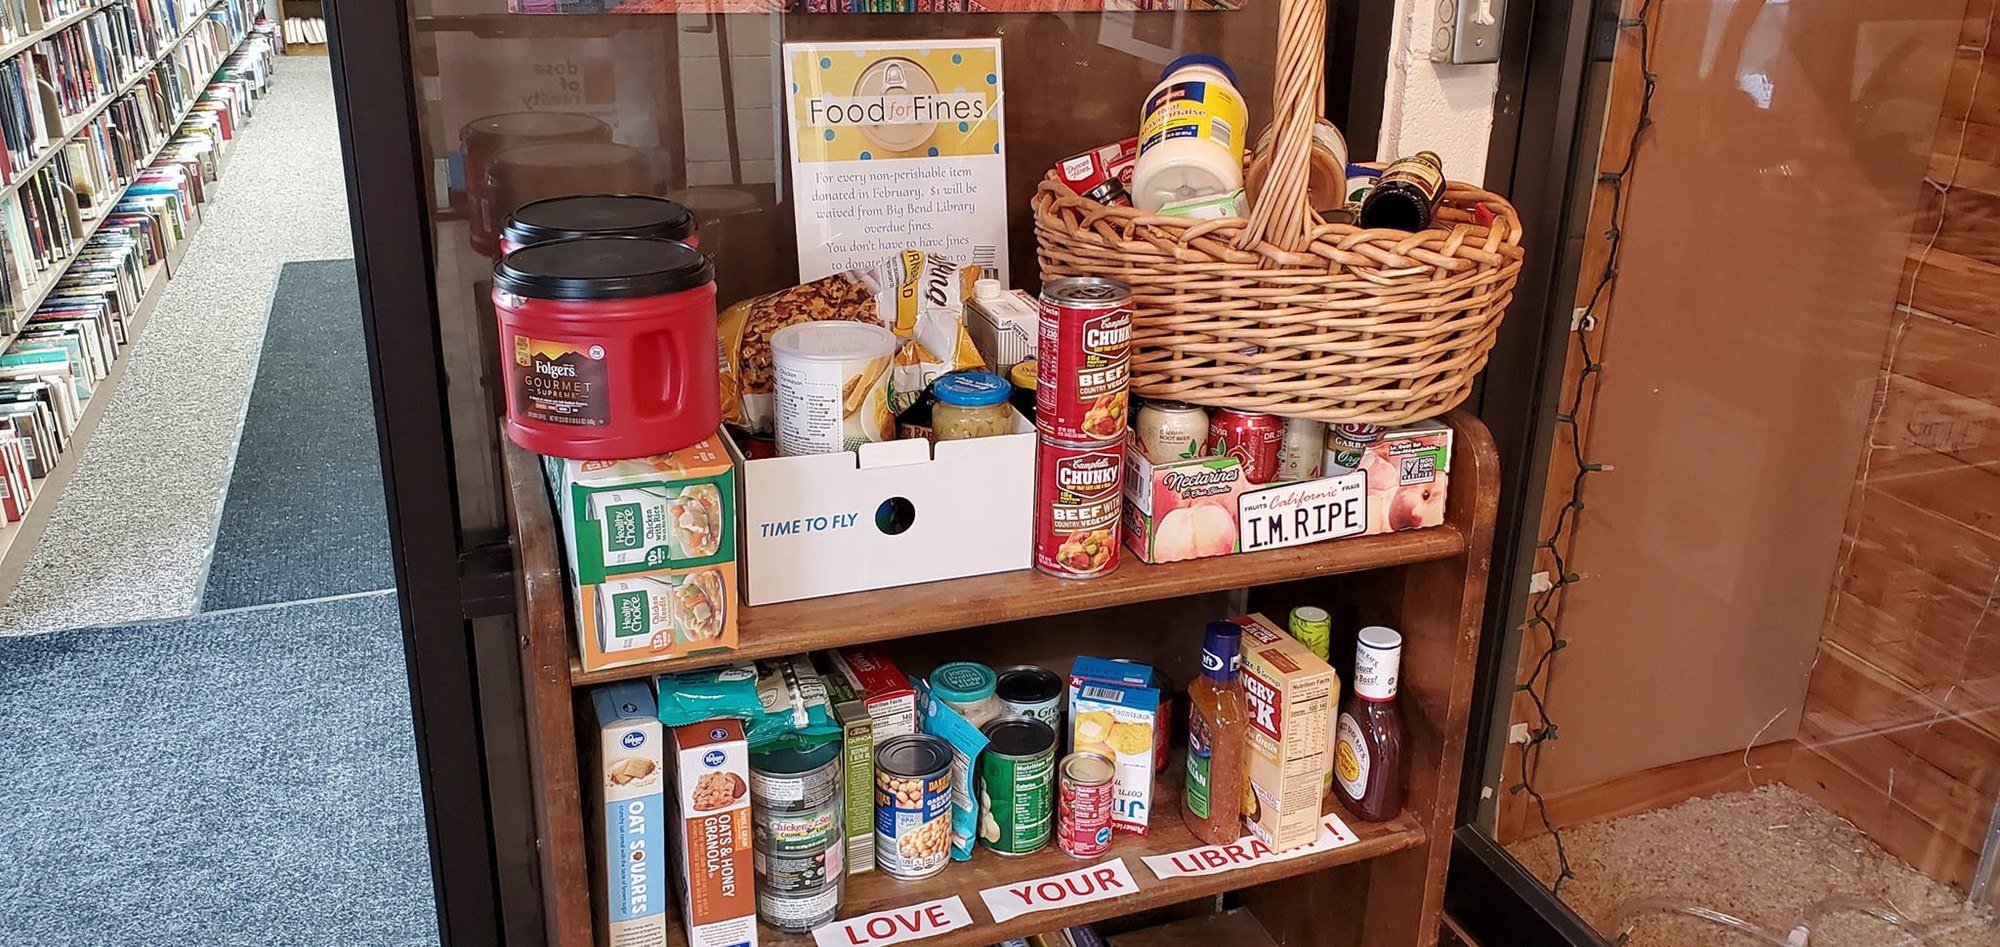 A brown wooden cart filled with non-perishable food items sits in the foyer of the Big Bend Village Library